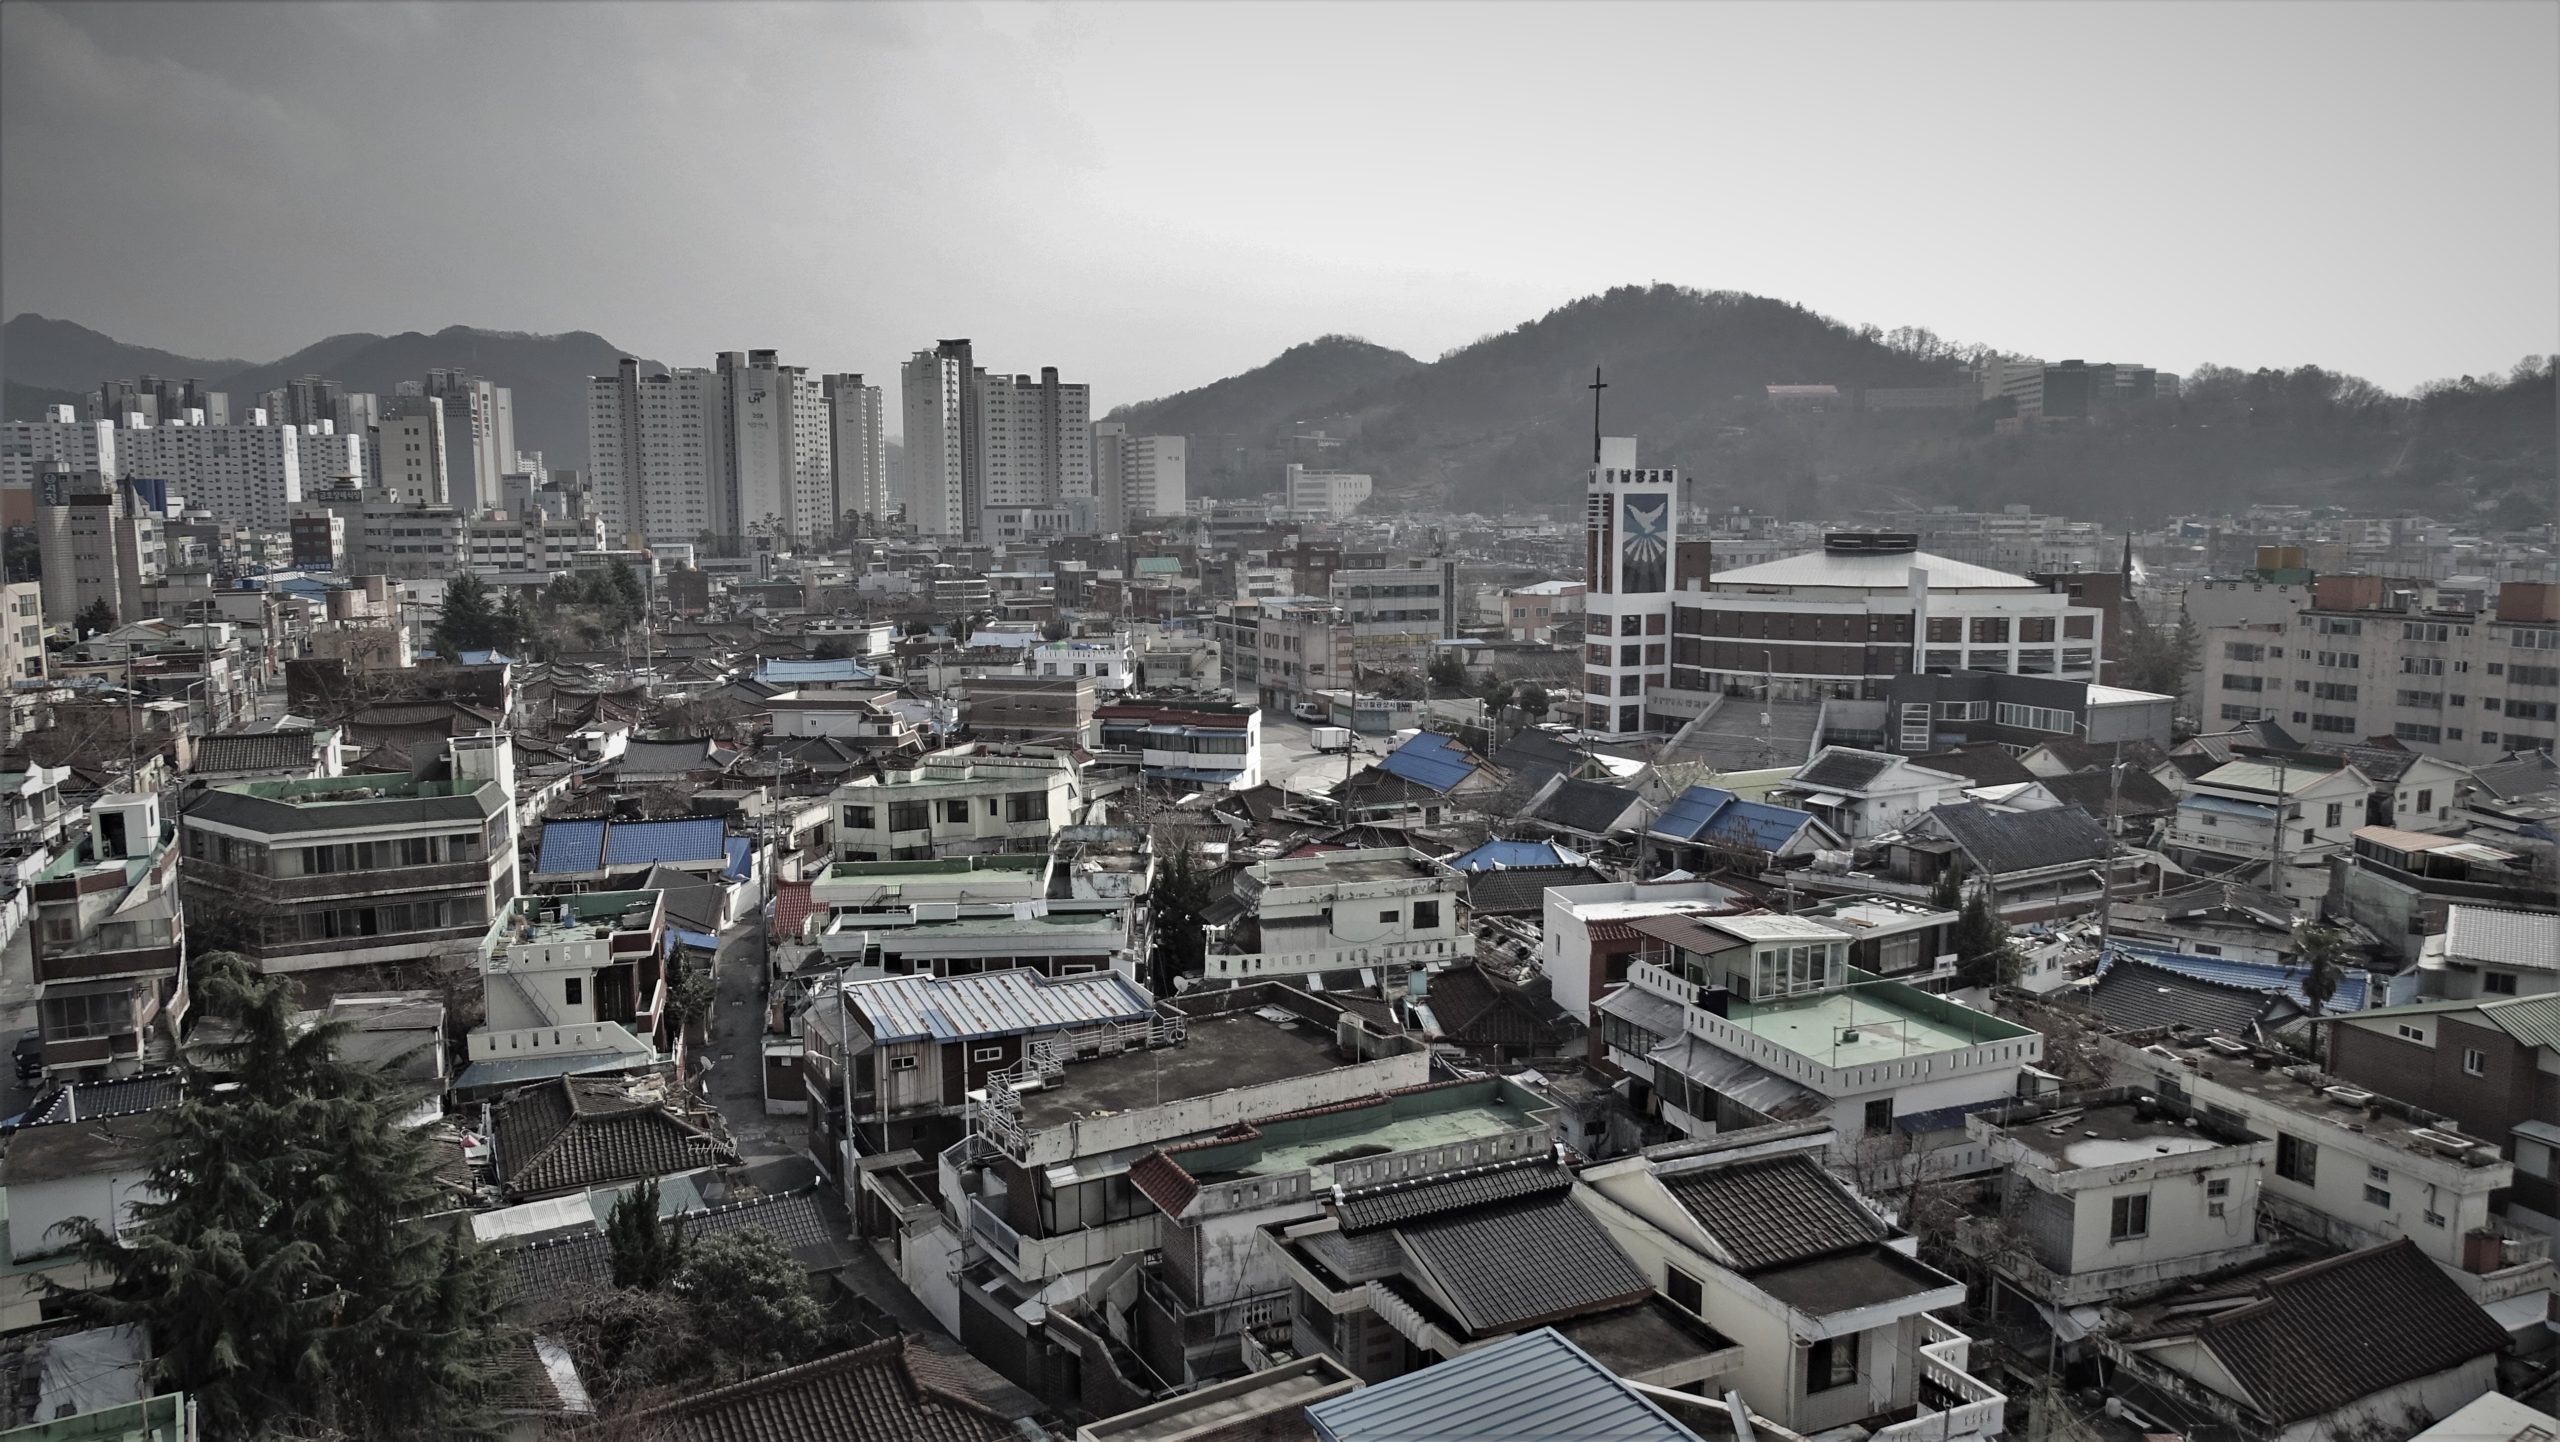 Evicting God: The Exodus of Hak-dong’s Condemned Churches